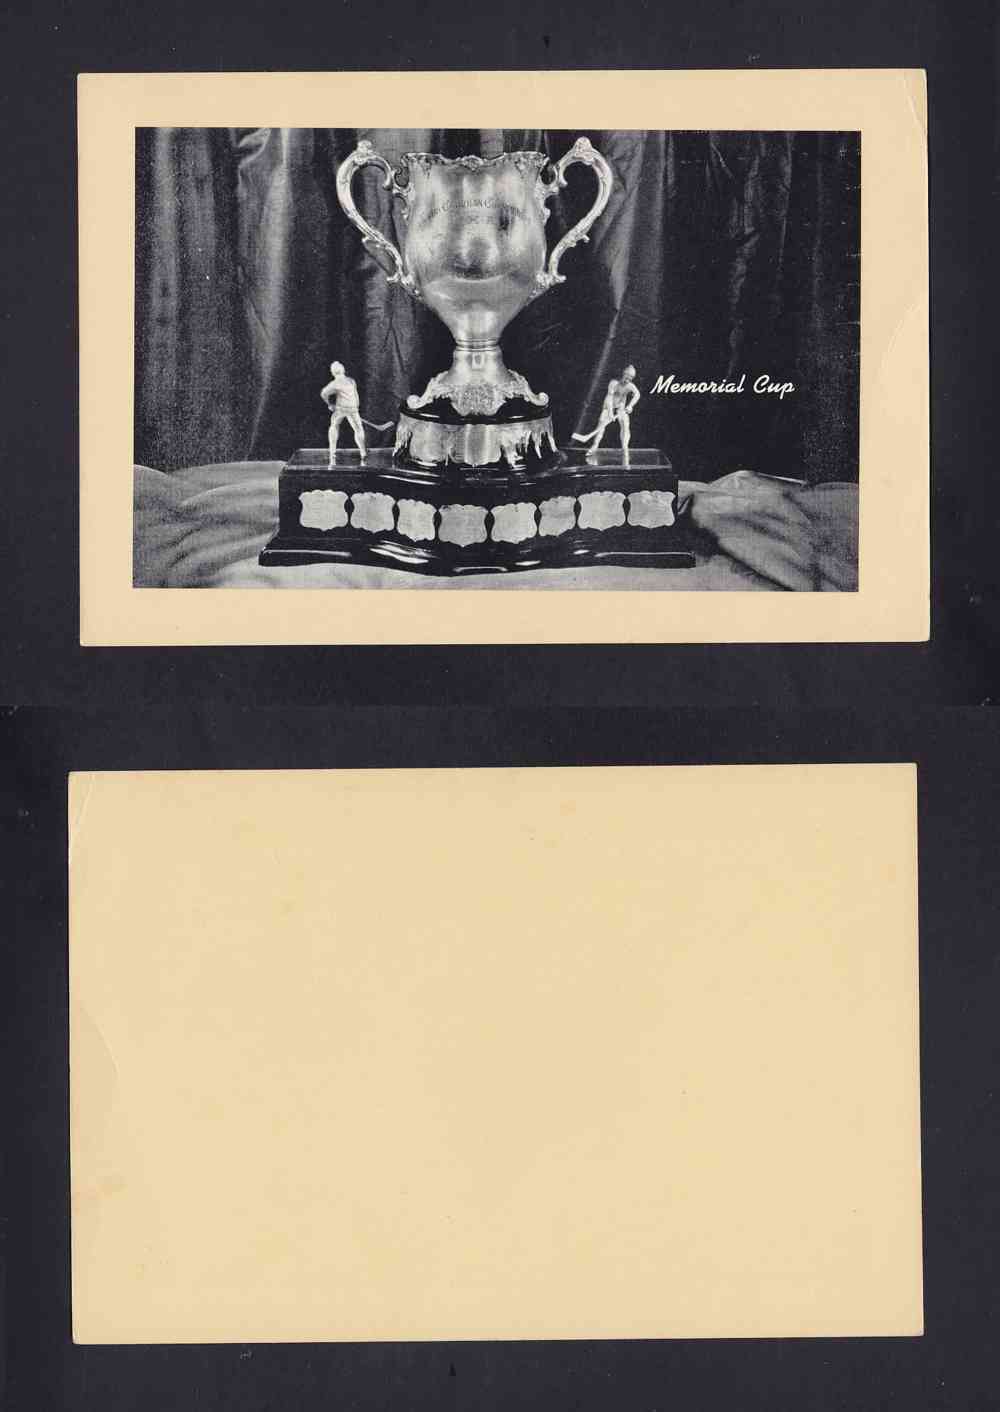 1934-43 BEEHIVE PHOTO GR.1 MEMORIAL CUP photo